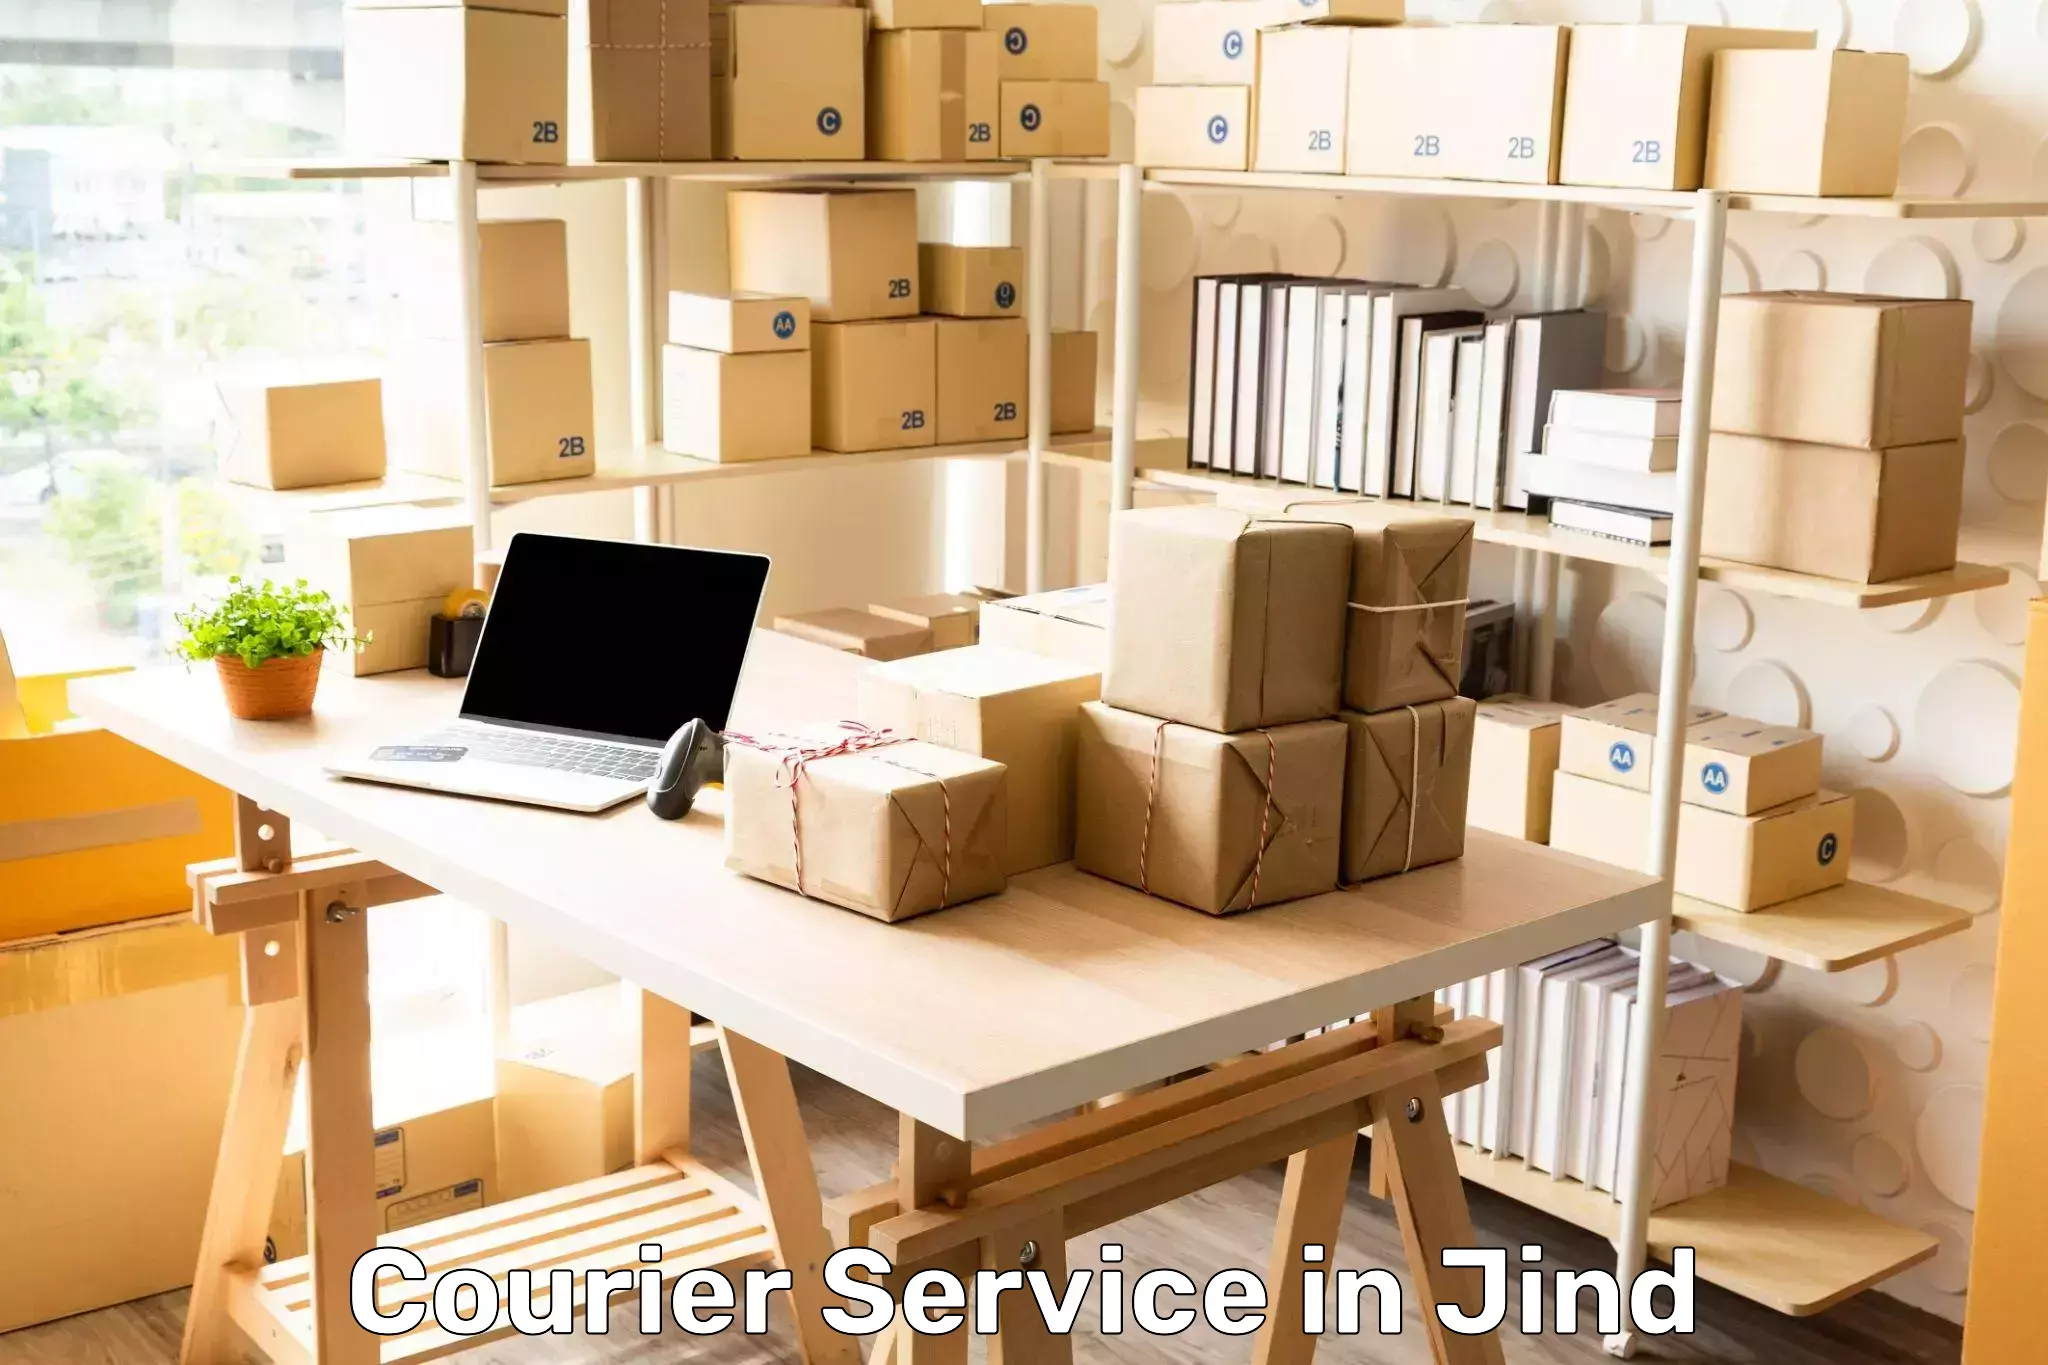 Advanced shipping technology in Jind